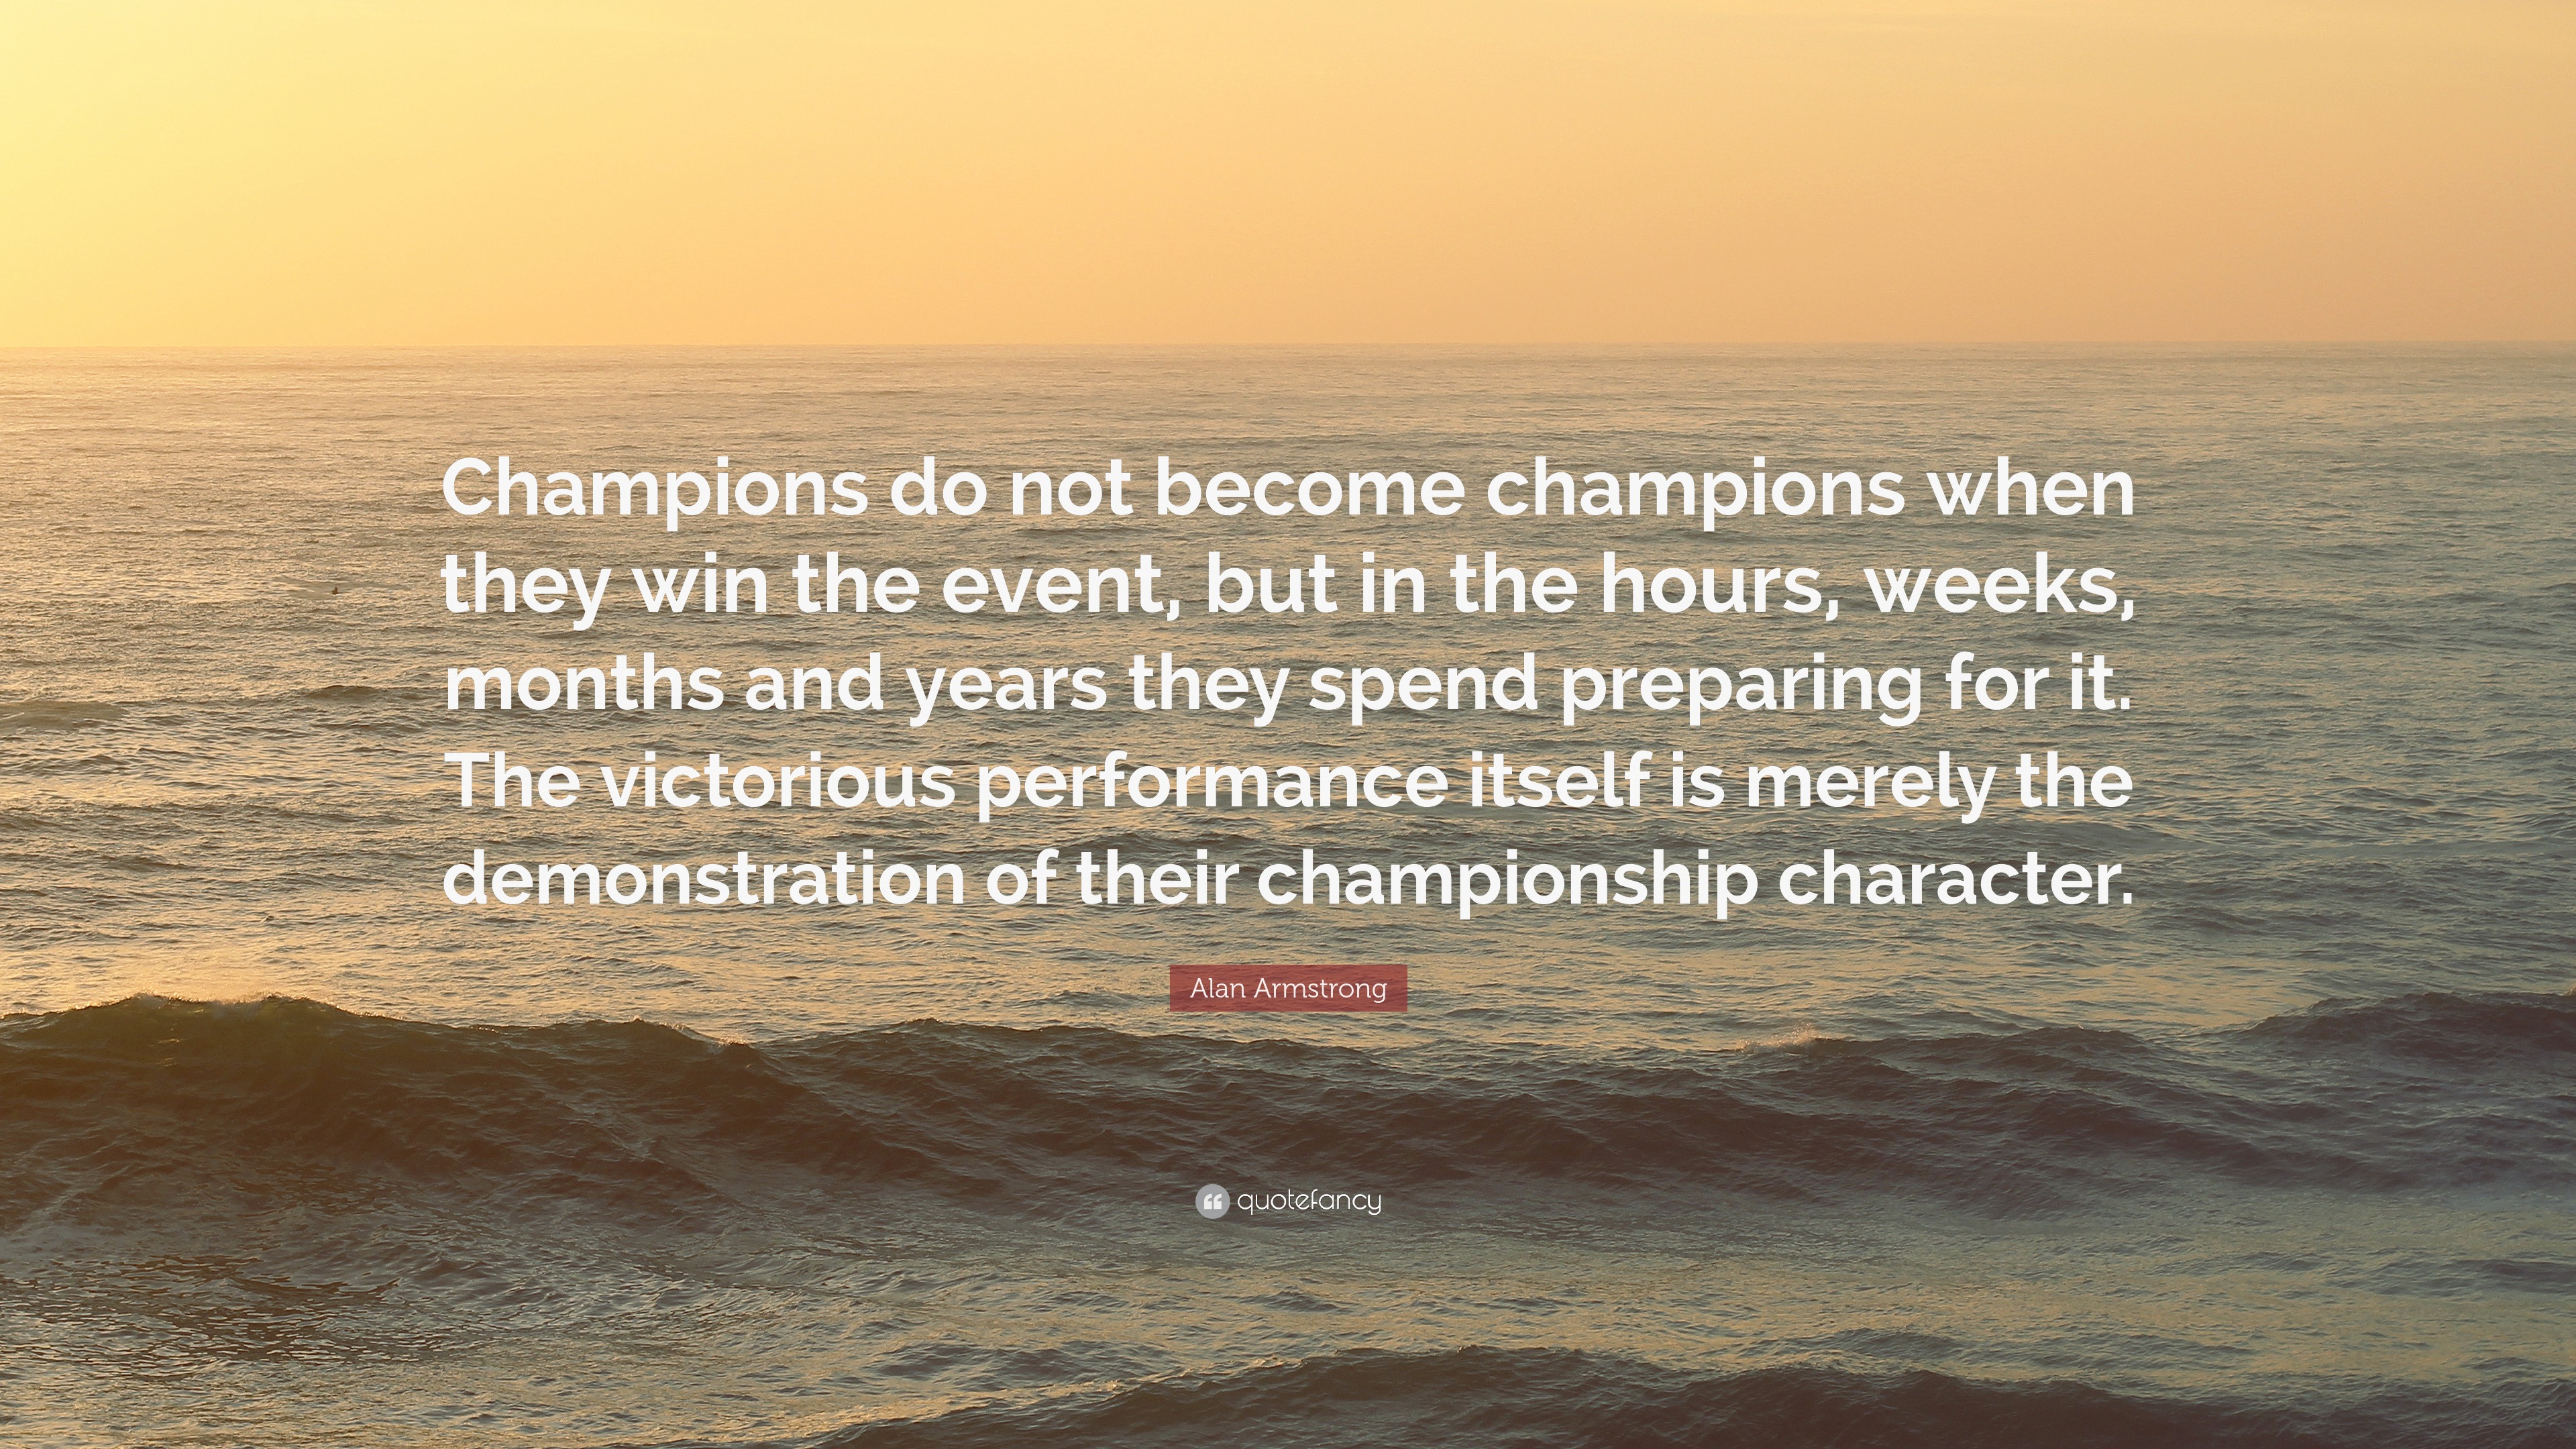 Alan Armstrong Quote: “Champions do not become champions when they win